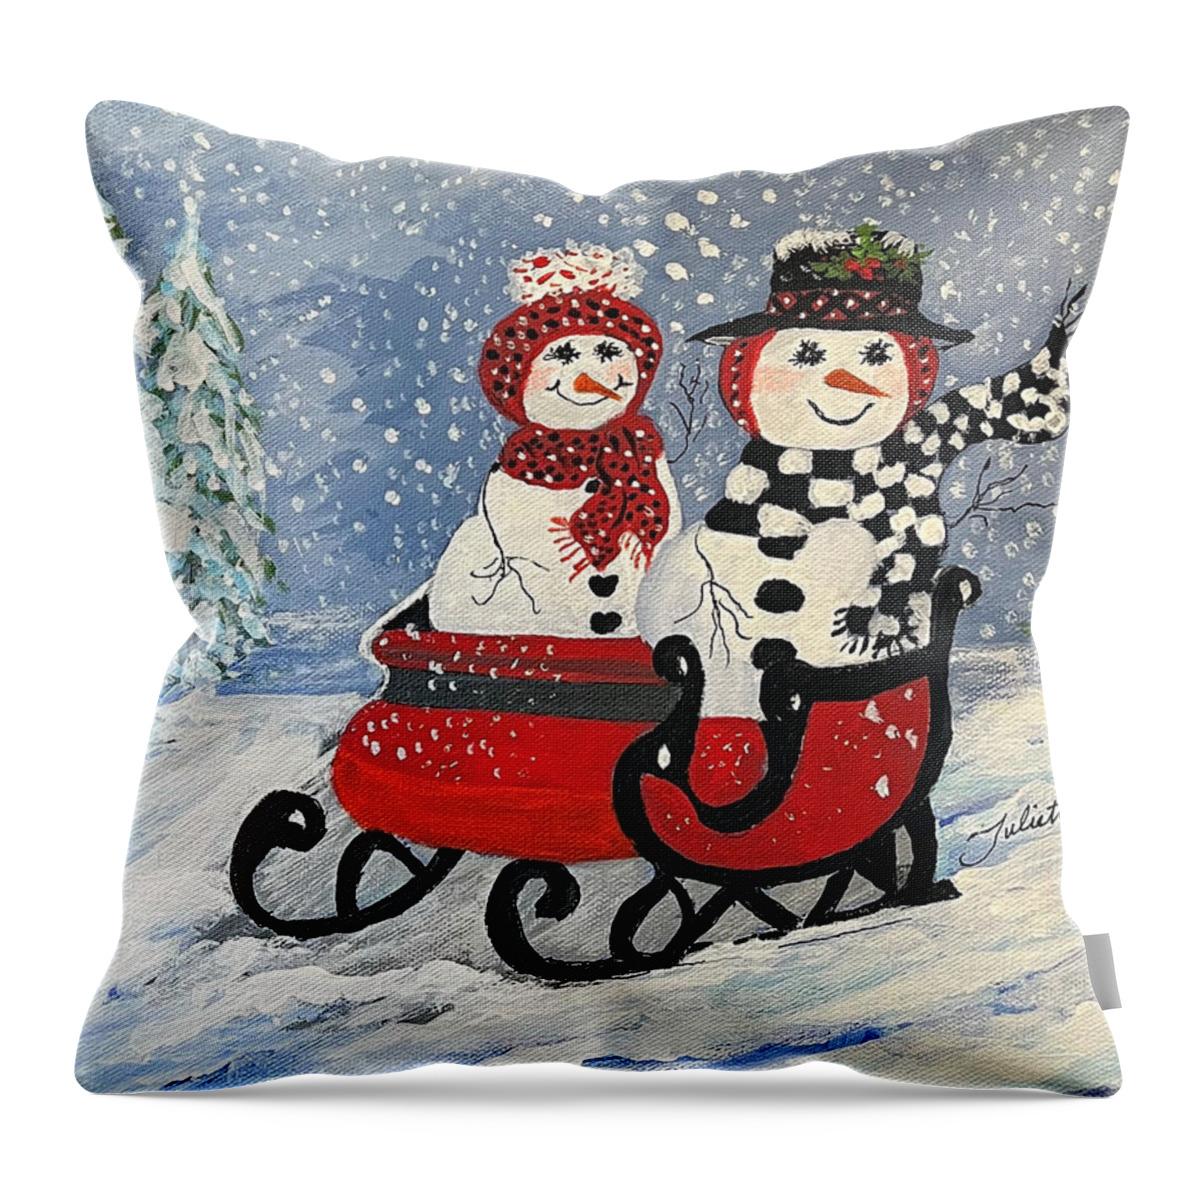 Snowman Throw Pillow featuring the painting Sleighride in the Snow by Juliette Becker